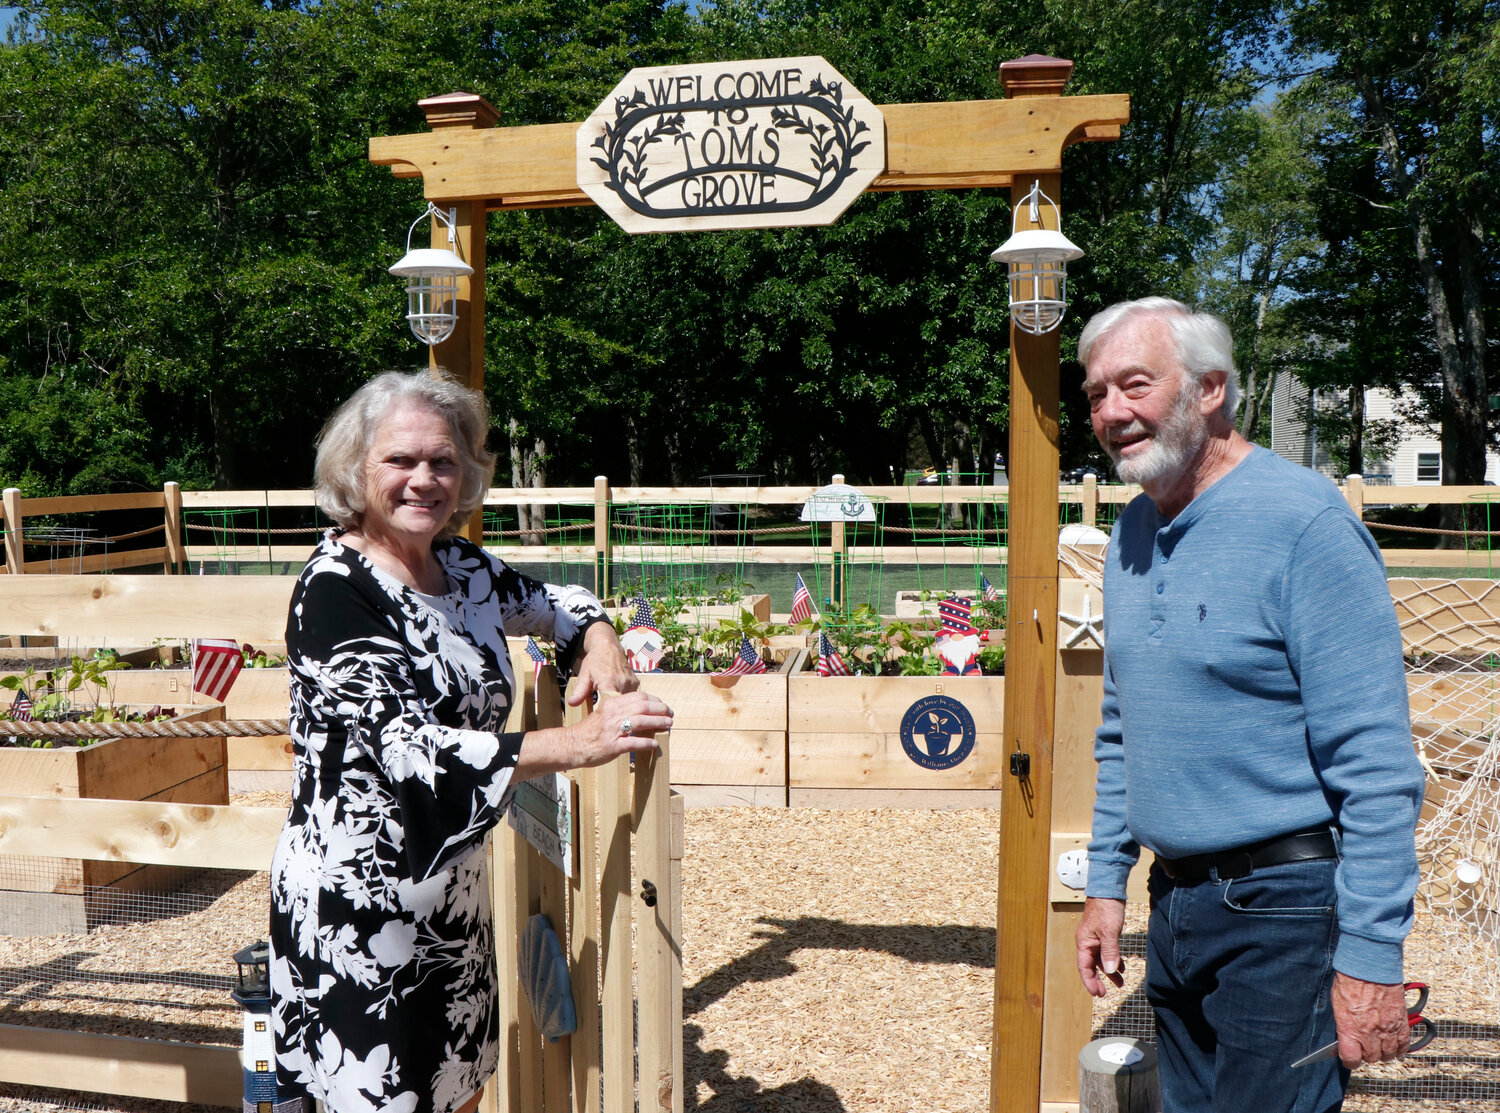 Garden co-coordinators Linda Heroux and Rick Hunter cut the ribbon at the dedication of the Tom’s Grove Memorial garden on Wednesday, May 31.